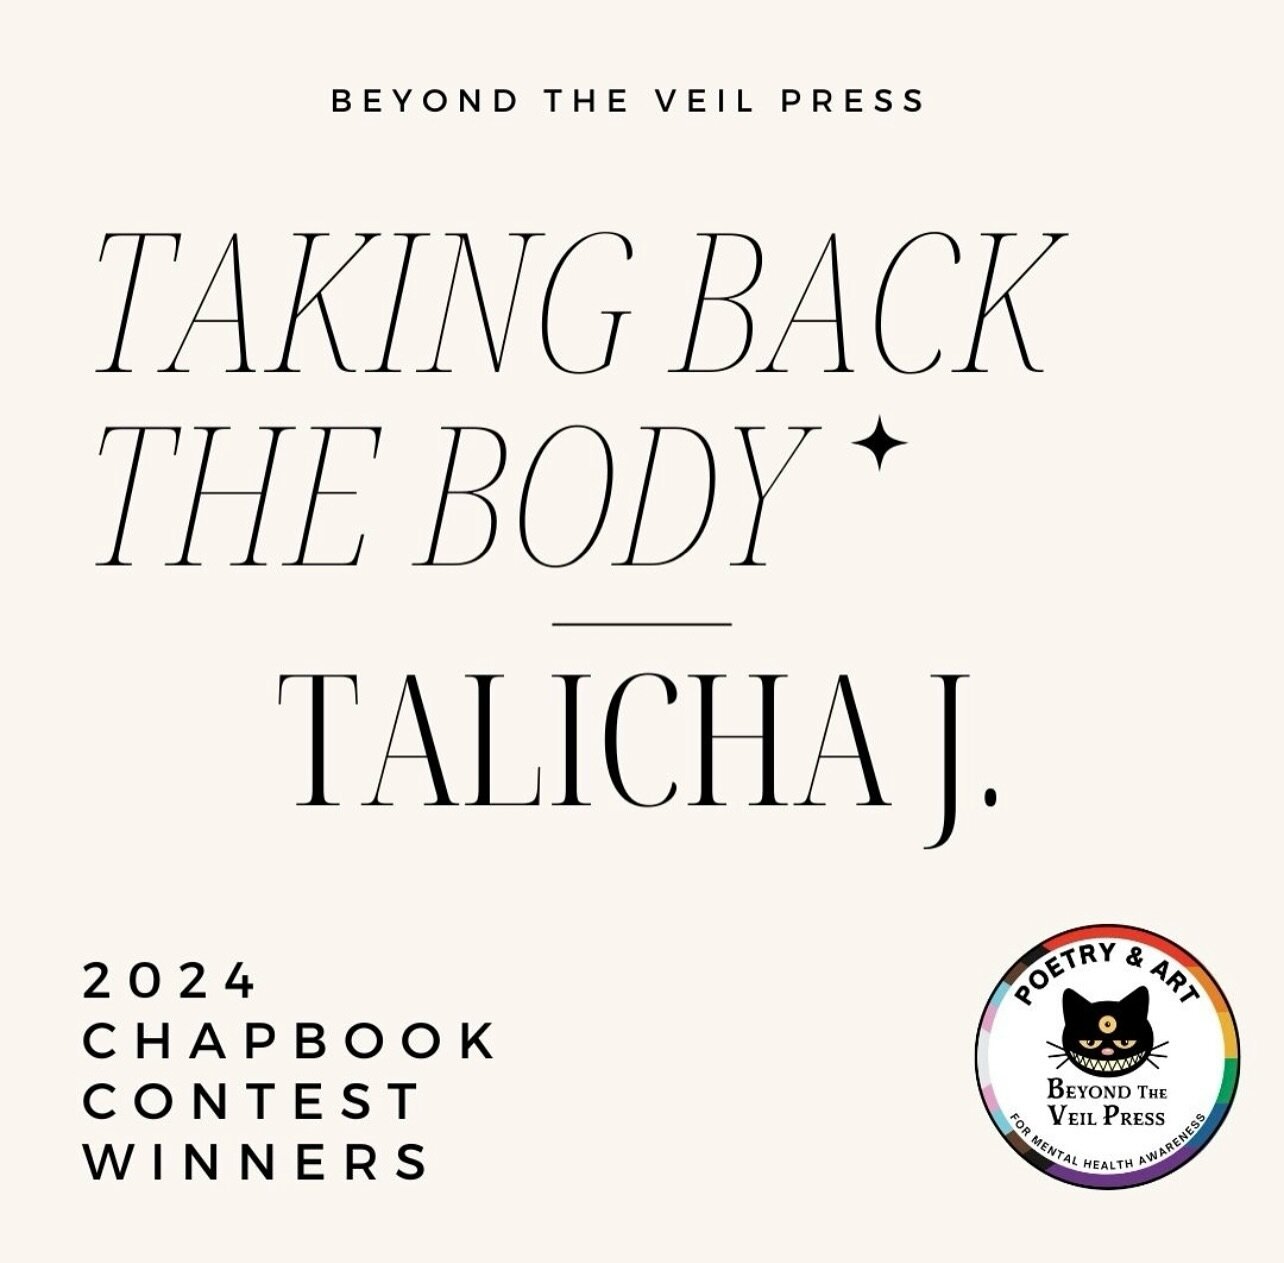 Super excited that my book will be forthcoming with @beyondtheveilpress 💜💜💜 Big thanks to all the folks who facilitated virtual workshops in 2023 so I could find my way back to writing.